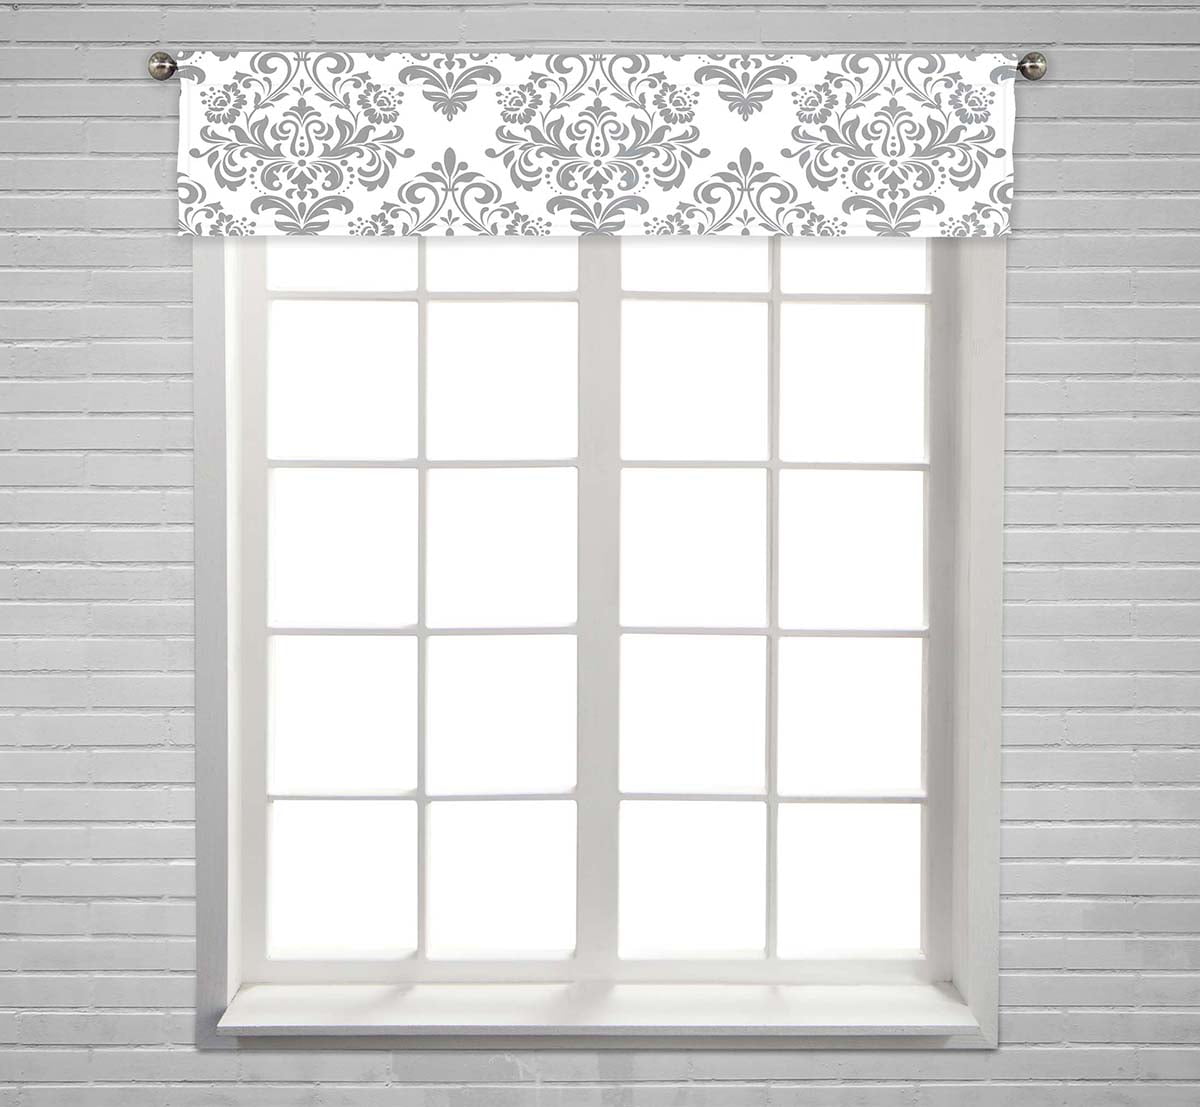 Details about   CoCaLo Bella Window Valance 36 x 48 in 